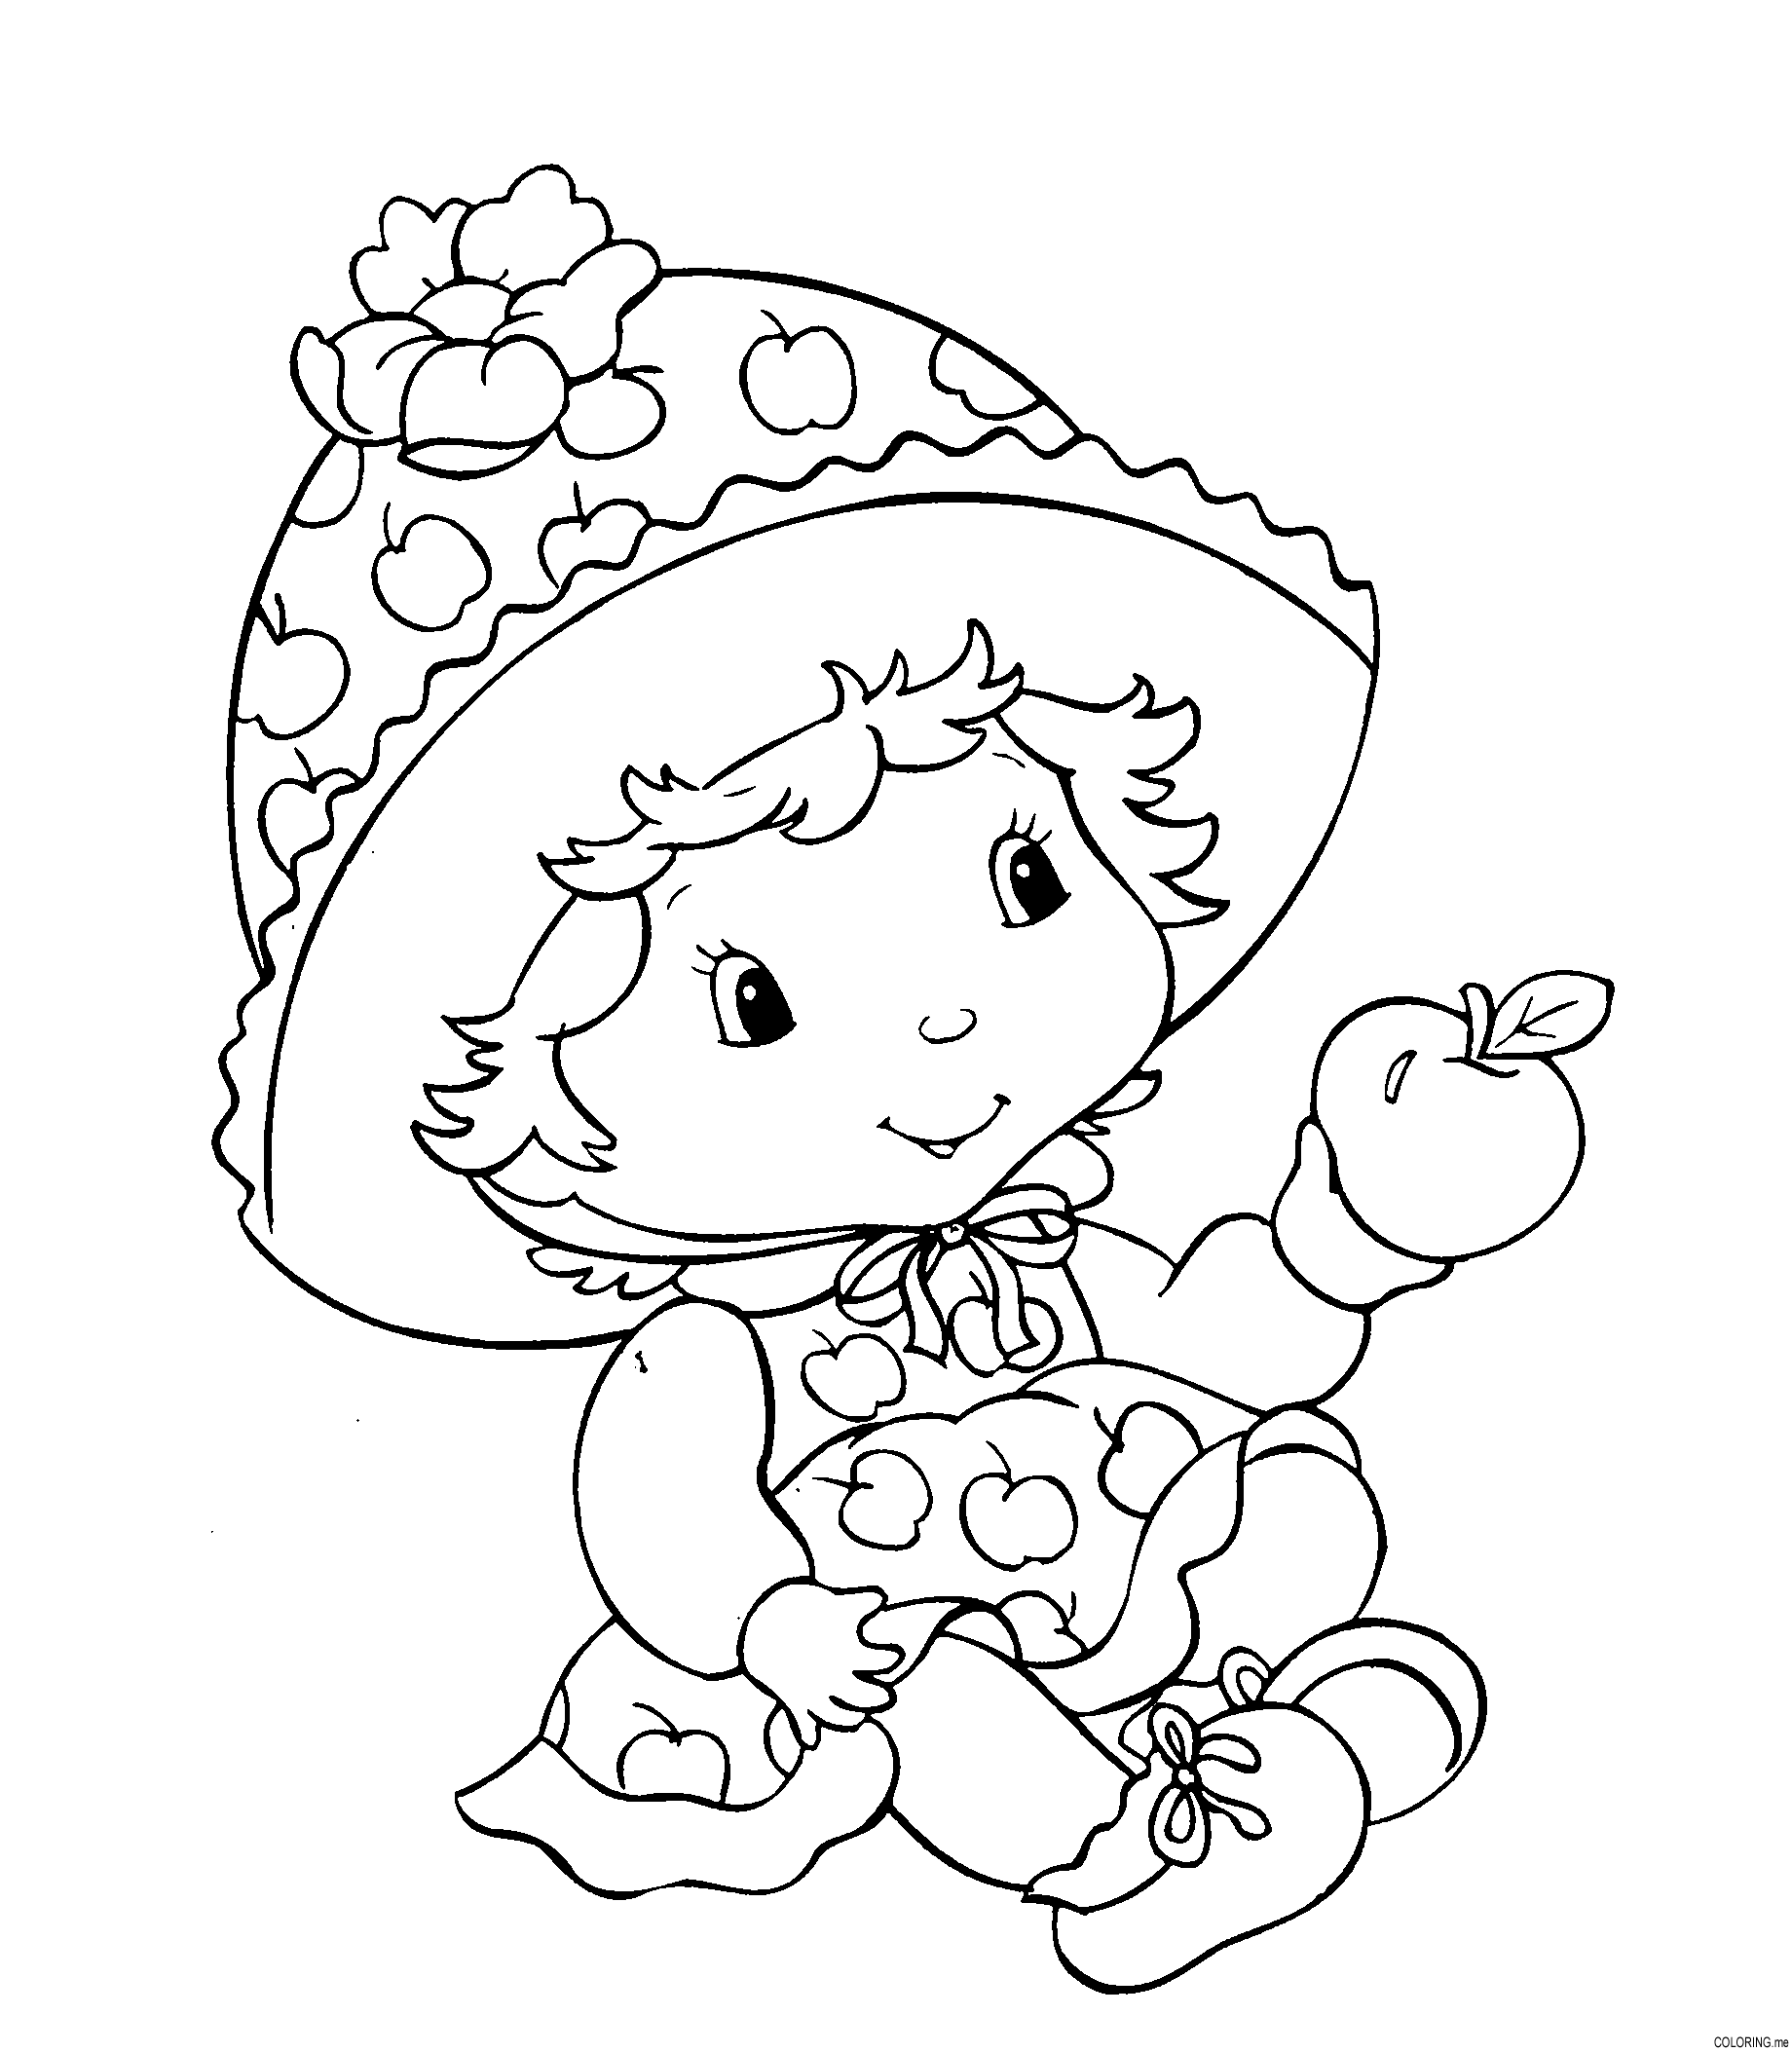 Free Printable Strawberry Shortcake Coloring Pages For Kids